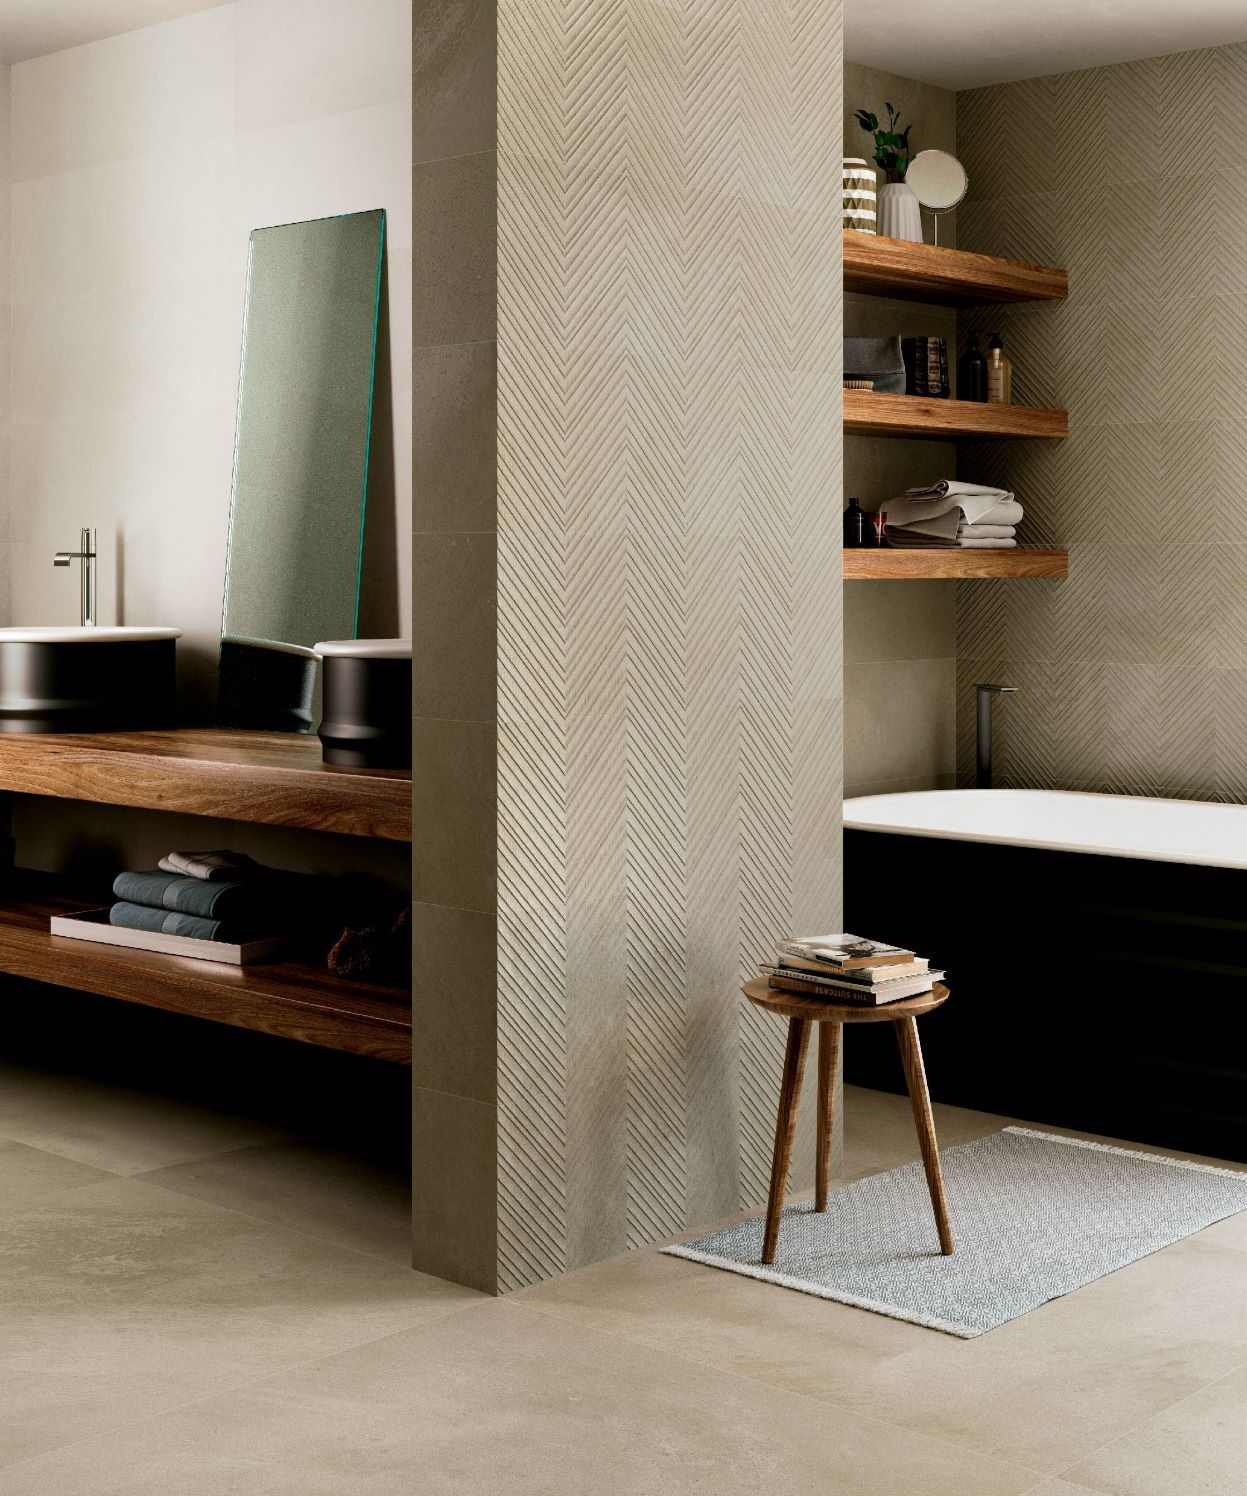 Tribeca - Sand | Stones & More | Finest selection of Mosaics, Glass, Tile and Stone